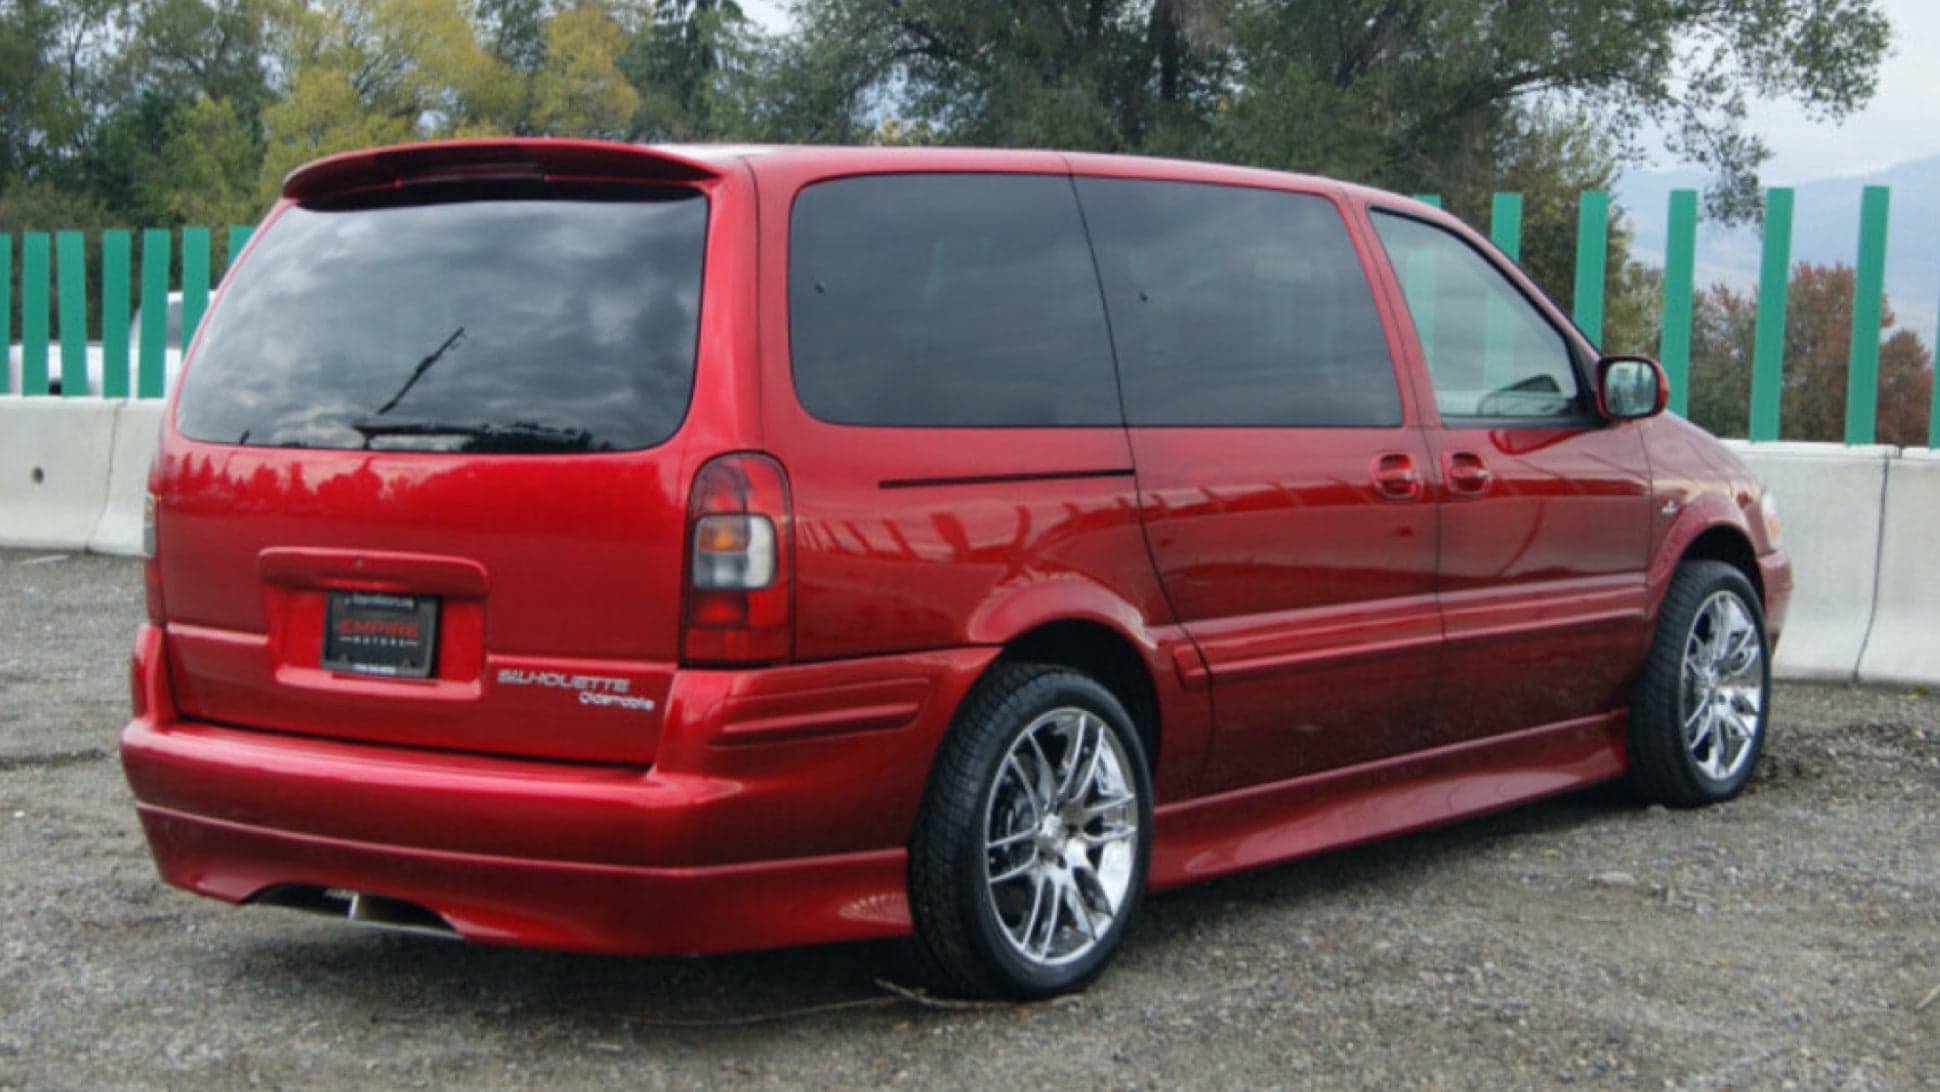 Oldsmobile Almost Had Its Own Tuning Division to Make Hot Versions of Even the Silhouette Minivan